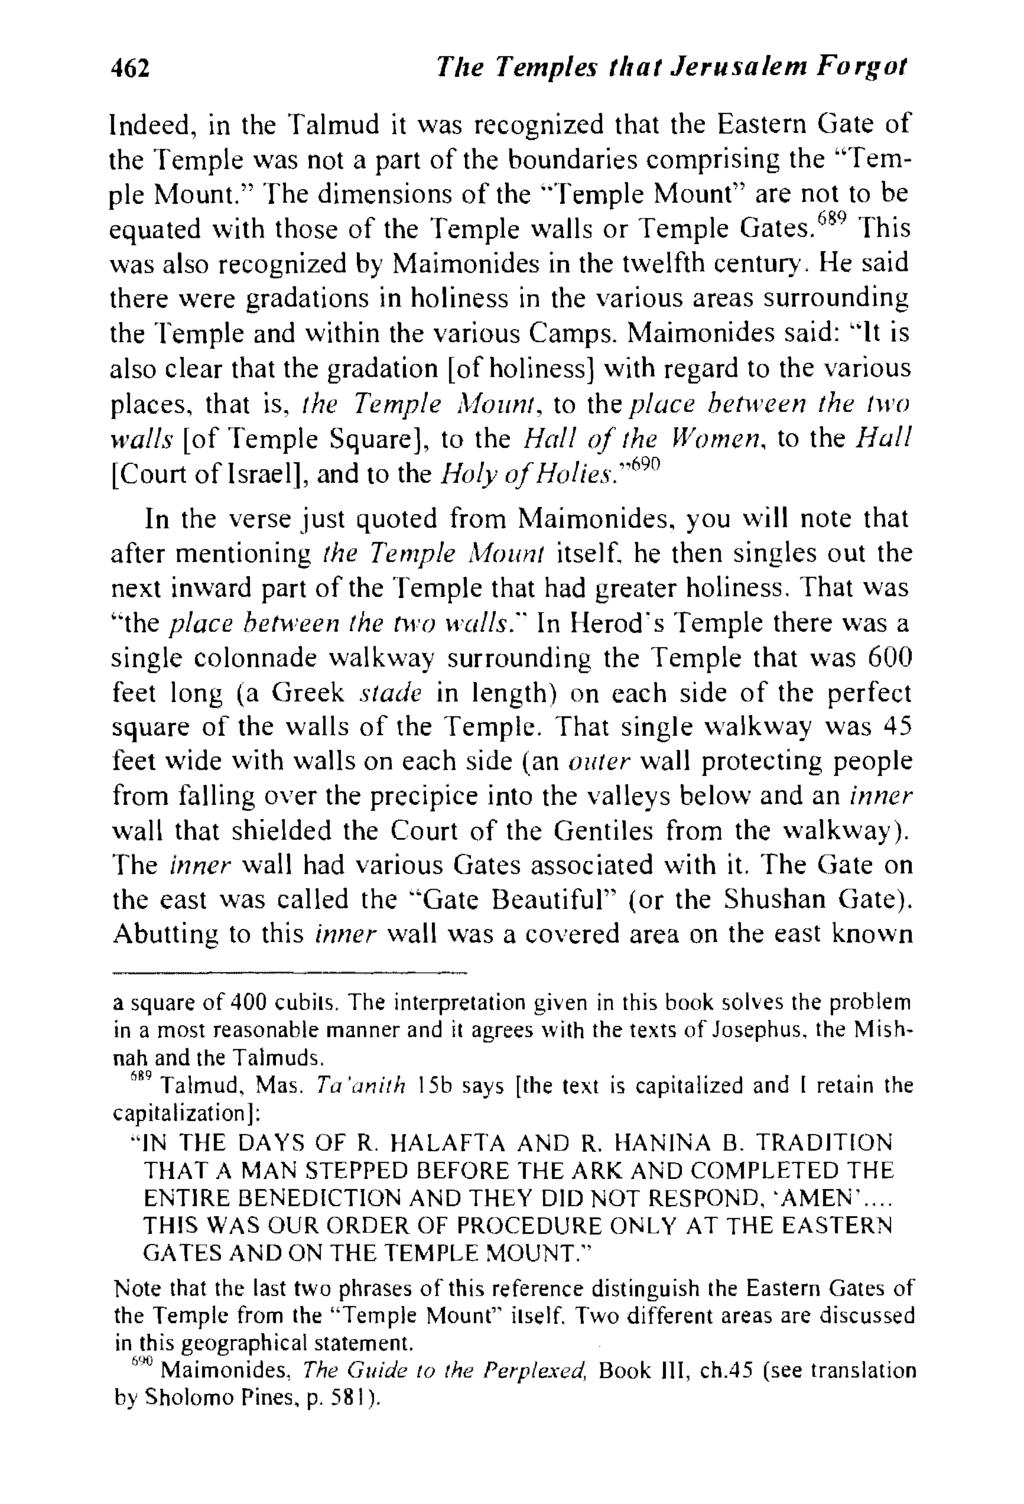 462 Tire Temples tltat Jerusalem Forgot Indeed, in the Talmud it was recognized that the Eastern Gate of the Temple was not a part of the boundaries comprising the "Temple Mount.